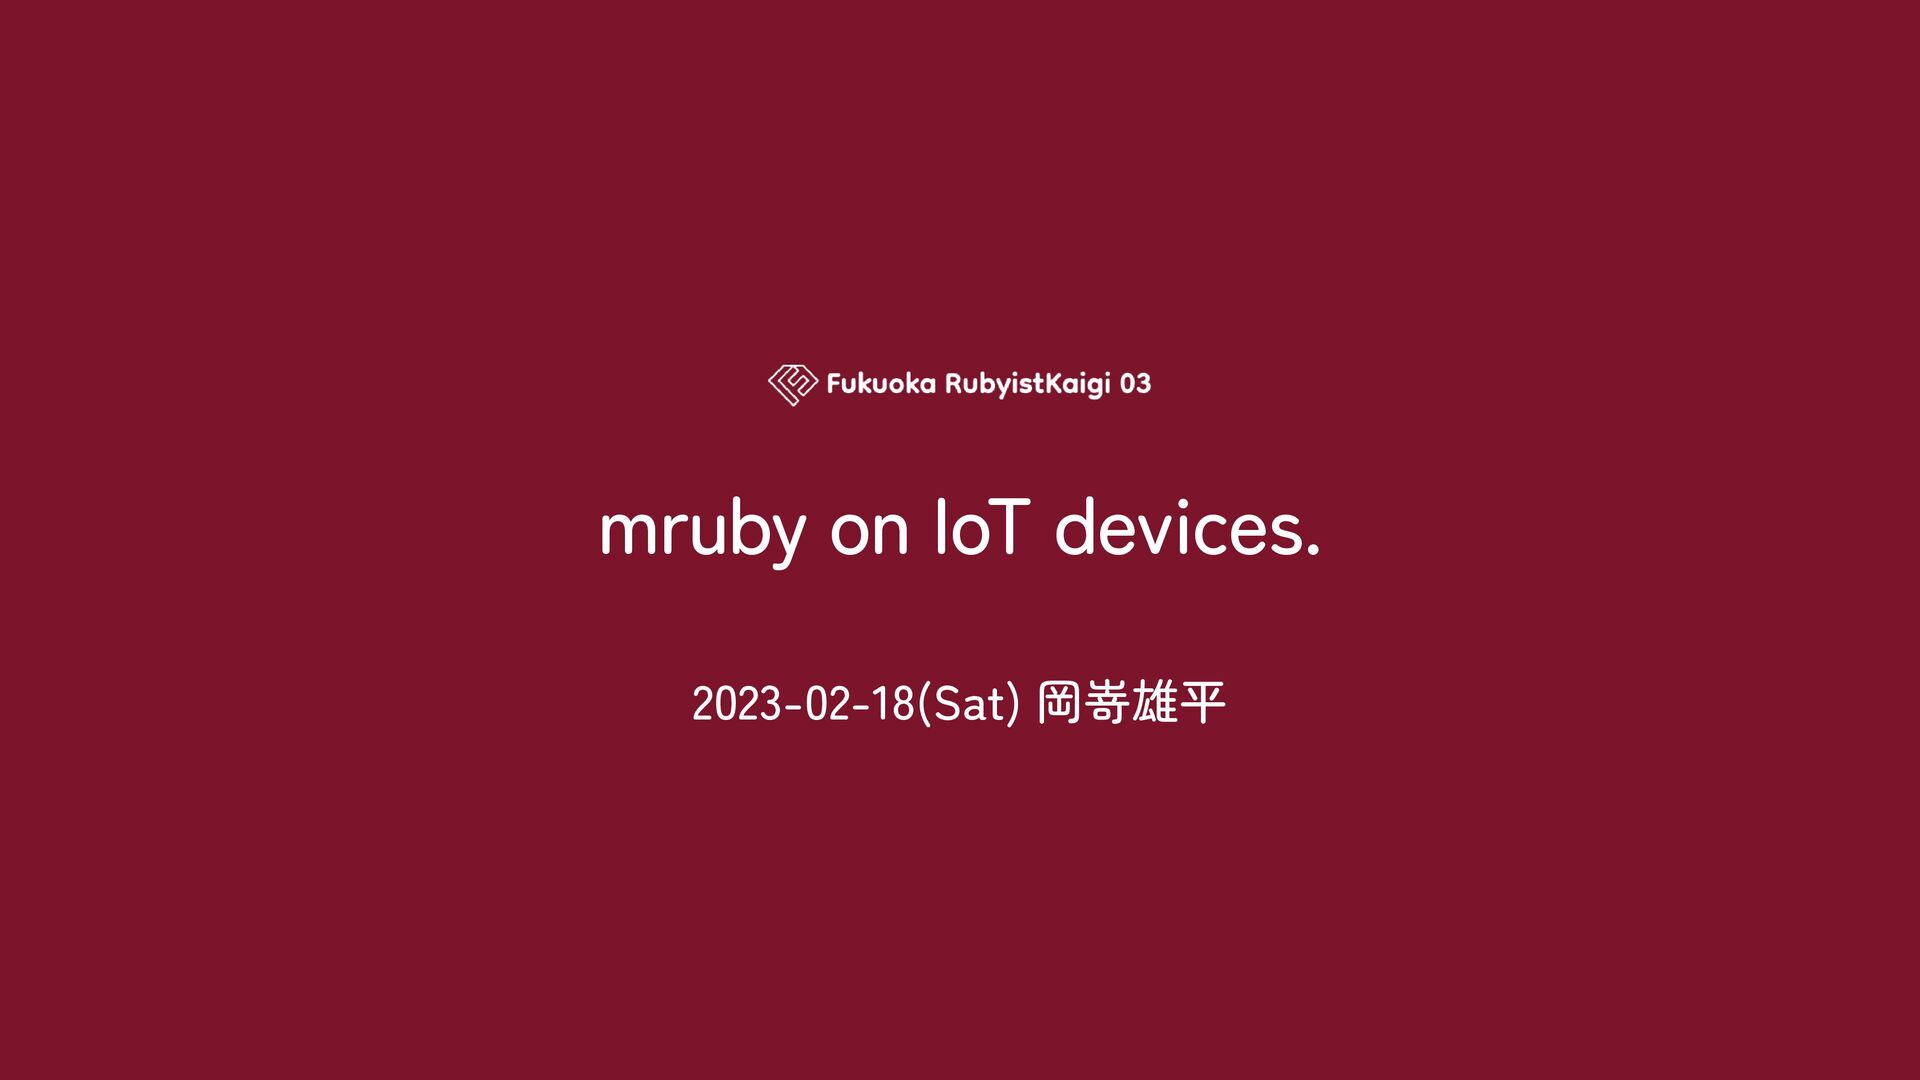 mruby on IoT devices.